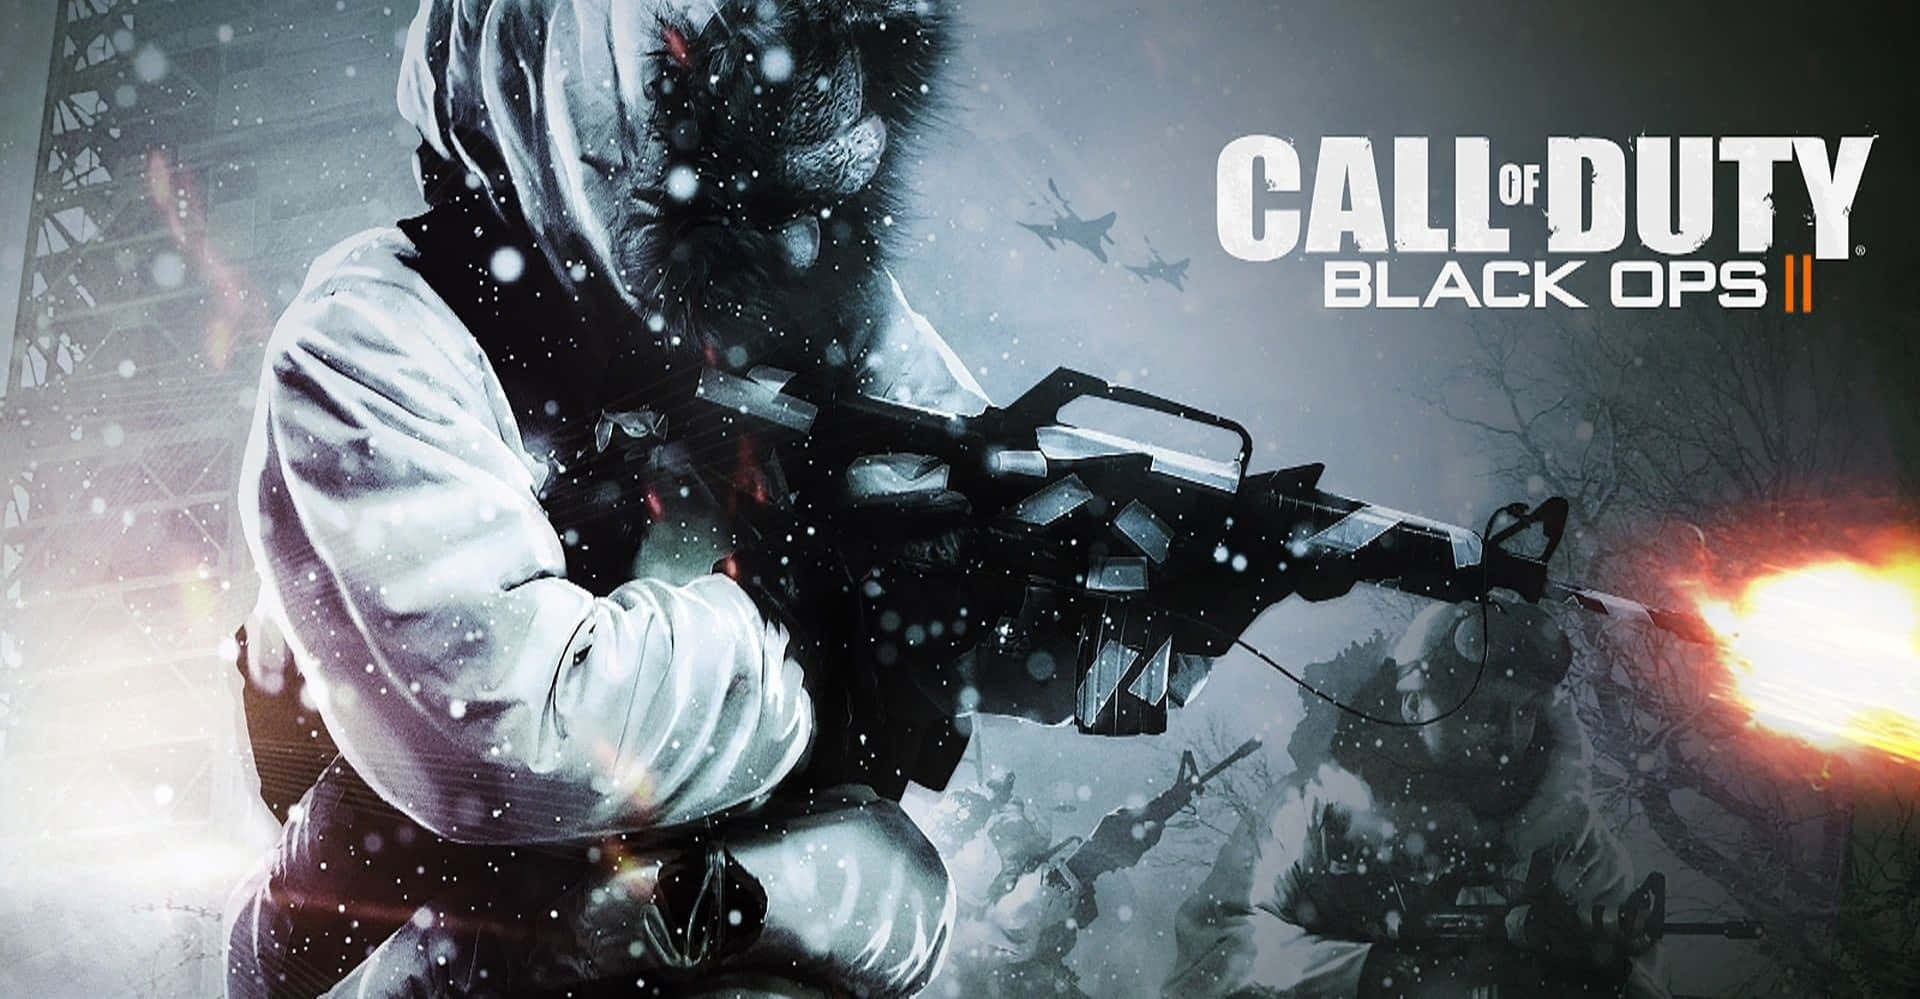 Be ready for Call of Duty: Black Ops 3 Wallpaper